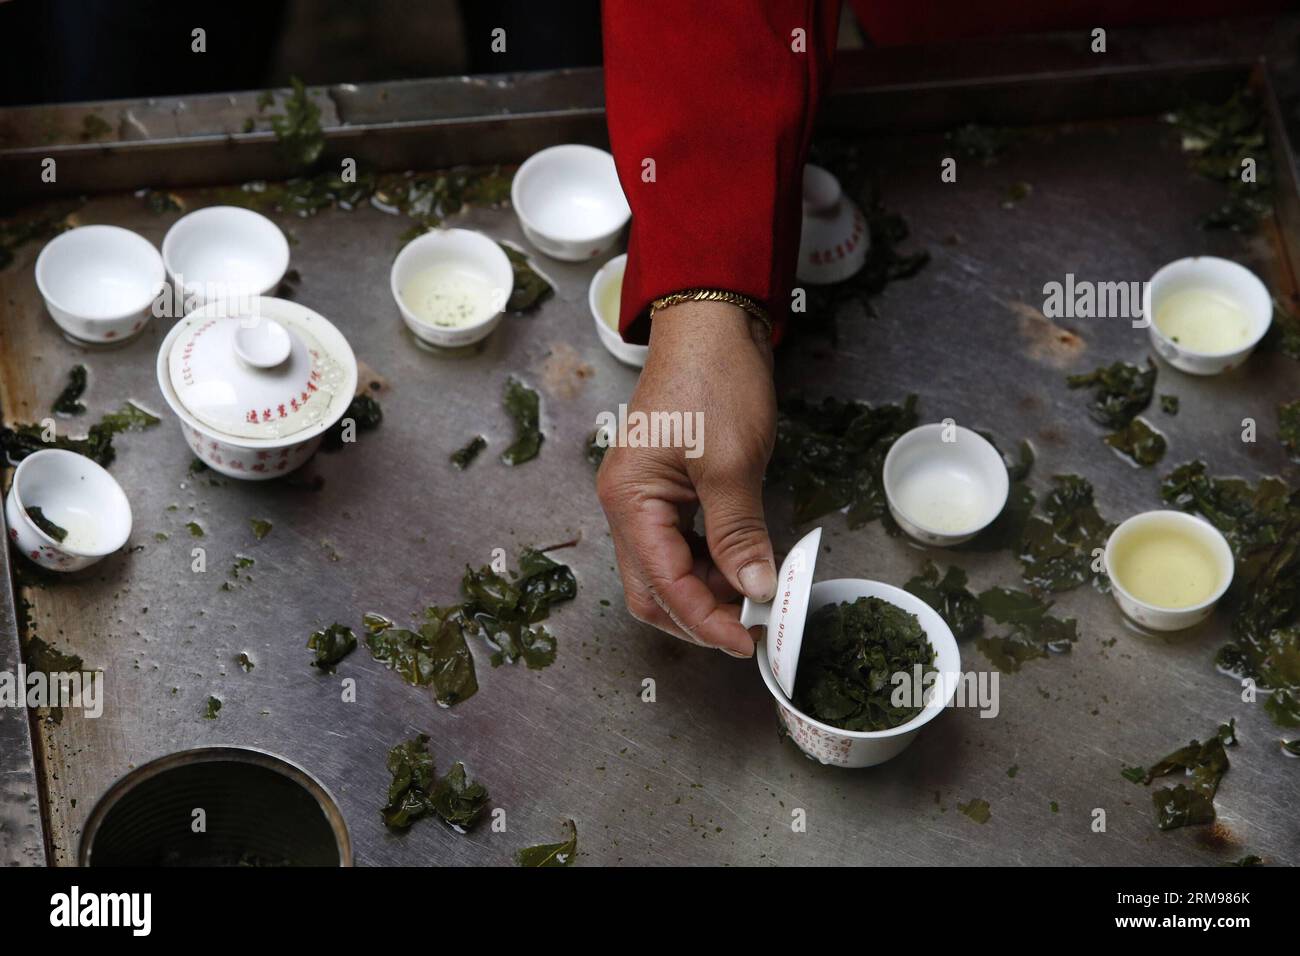 https://c8.alamy.com/comp/2RM986K/anxi-may-10-2014-xinhua-a-customer-tastes-sample-tieguanyin-the-best-oolong-tea-variety-produced-in-anxi-county-at-anxi-tea-wholesale-market-in-southeast-china-s-fujian-province-may-10-2014-anxi-has-over-40000-hectares-of-tea-gardens-with-an-annual-production-of-around-68000-tons-of-tea-about-800000-anxi-people-are-involved-in-the-tea-industry-xinhuashen-bohan-wf-china-fujian-anxi-tea-trade-cn-publicationxnotxinxchn-anxi-may-10-2014-xinhua-a-customer-tastes-sample-the-best-oolong-tea-variety-produced-in-anxi-county-at-anxi-tea-wholesale-market-in-south-east-china-s-2RM986K.jpg